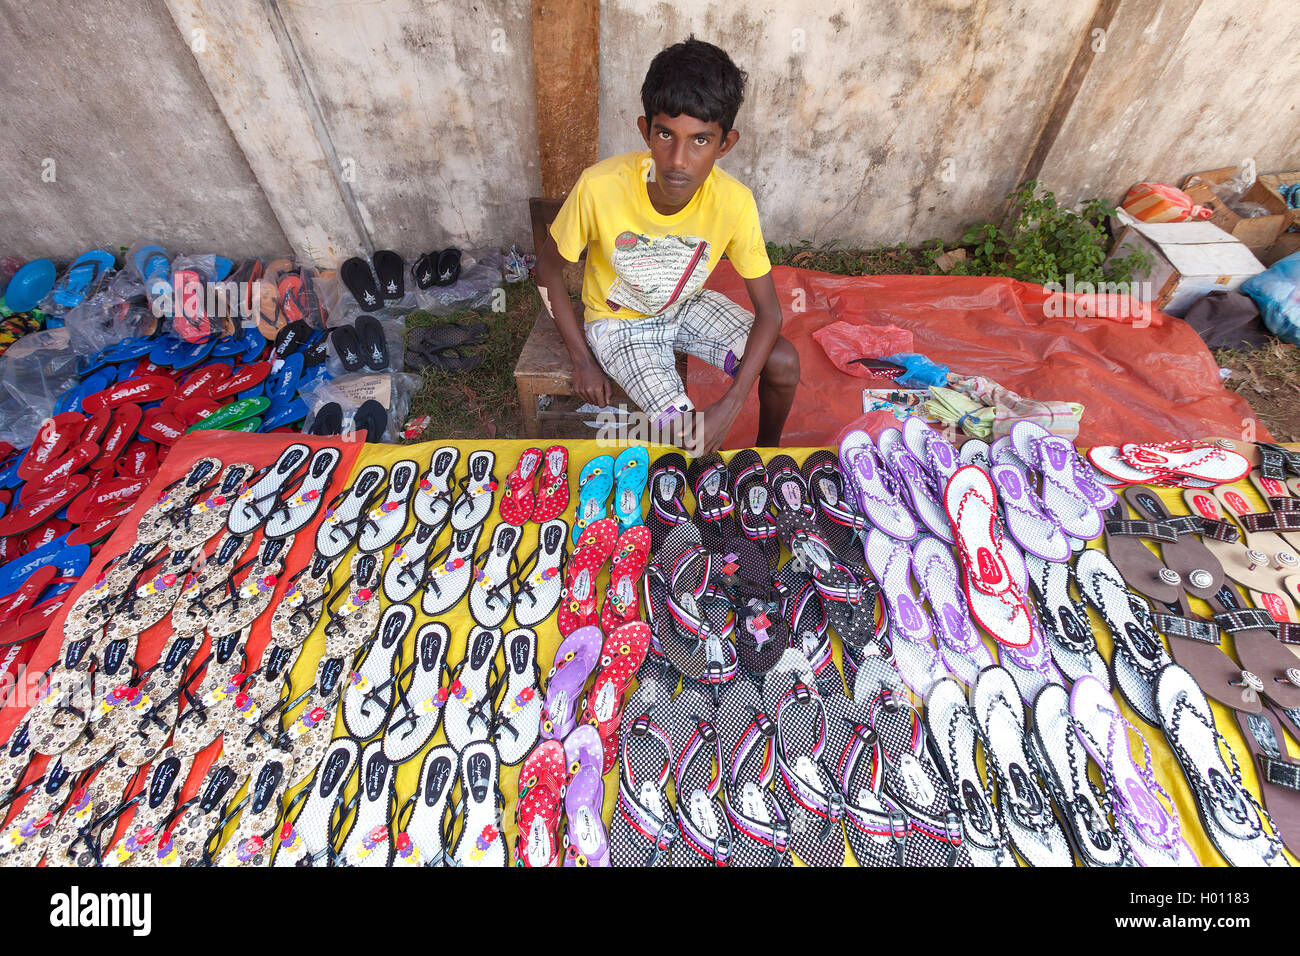 HIKKADUWA, SRI LANKA - FEBRUARY 23, 2014: Young local street vendor selling  sandals. The Sunday market is great way to see local Stock Photo - Alamy